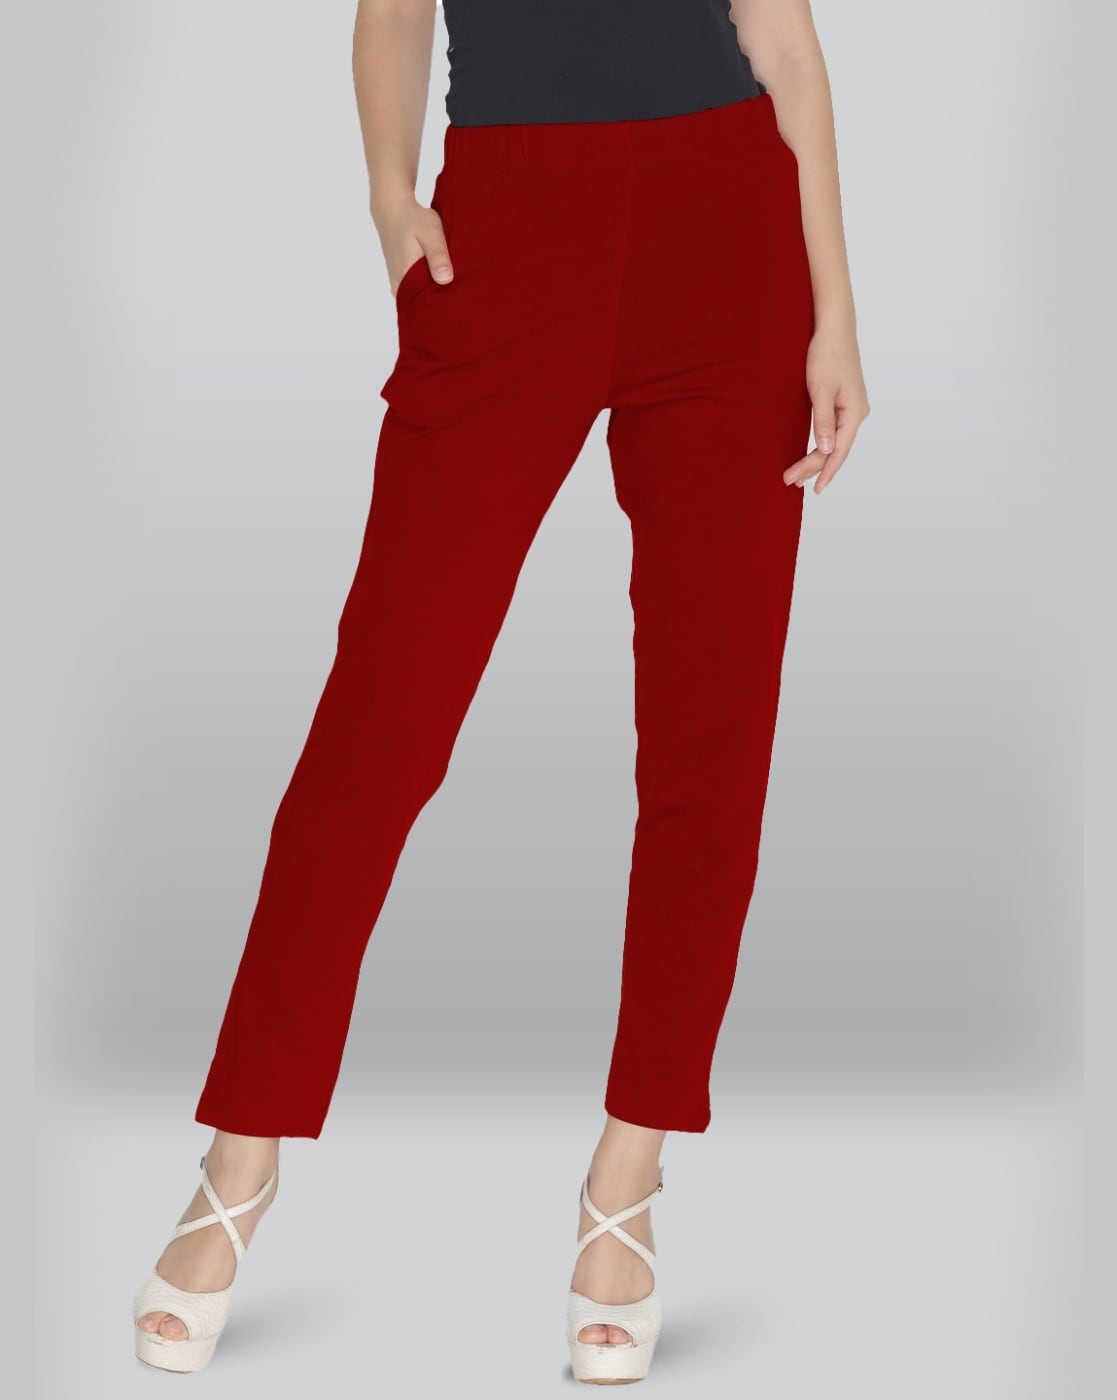 SEXY SKINNY STRETCH JEANS 10 12 14 WOMENS red DENIM HOT PANTS LADIES  TROUSERS AU - ARNIVAL